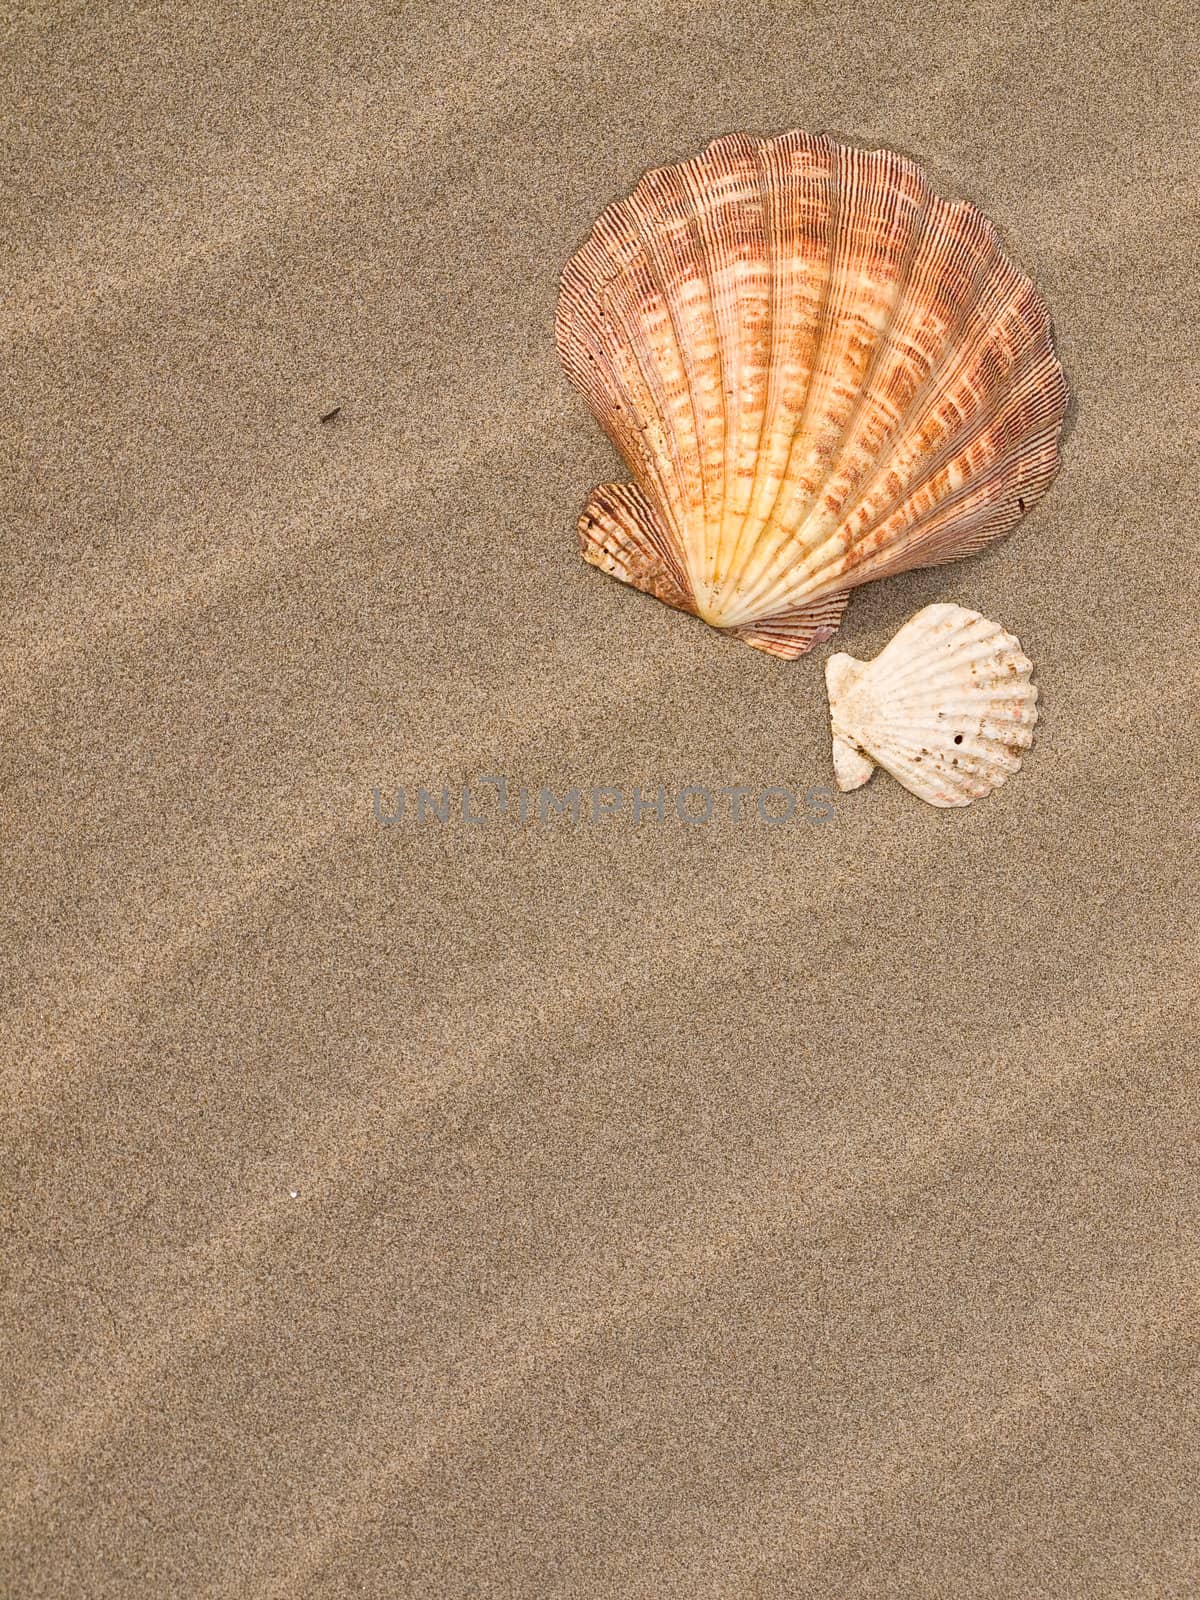 Scallop Shell on a Wind Swept Sandy Beach by Frankljunior